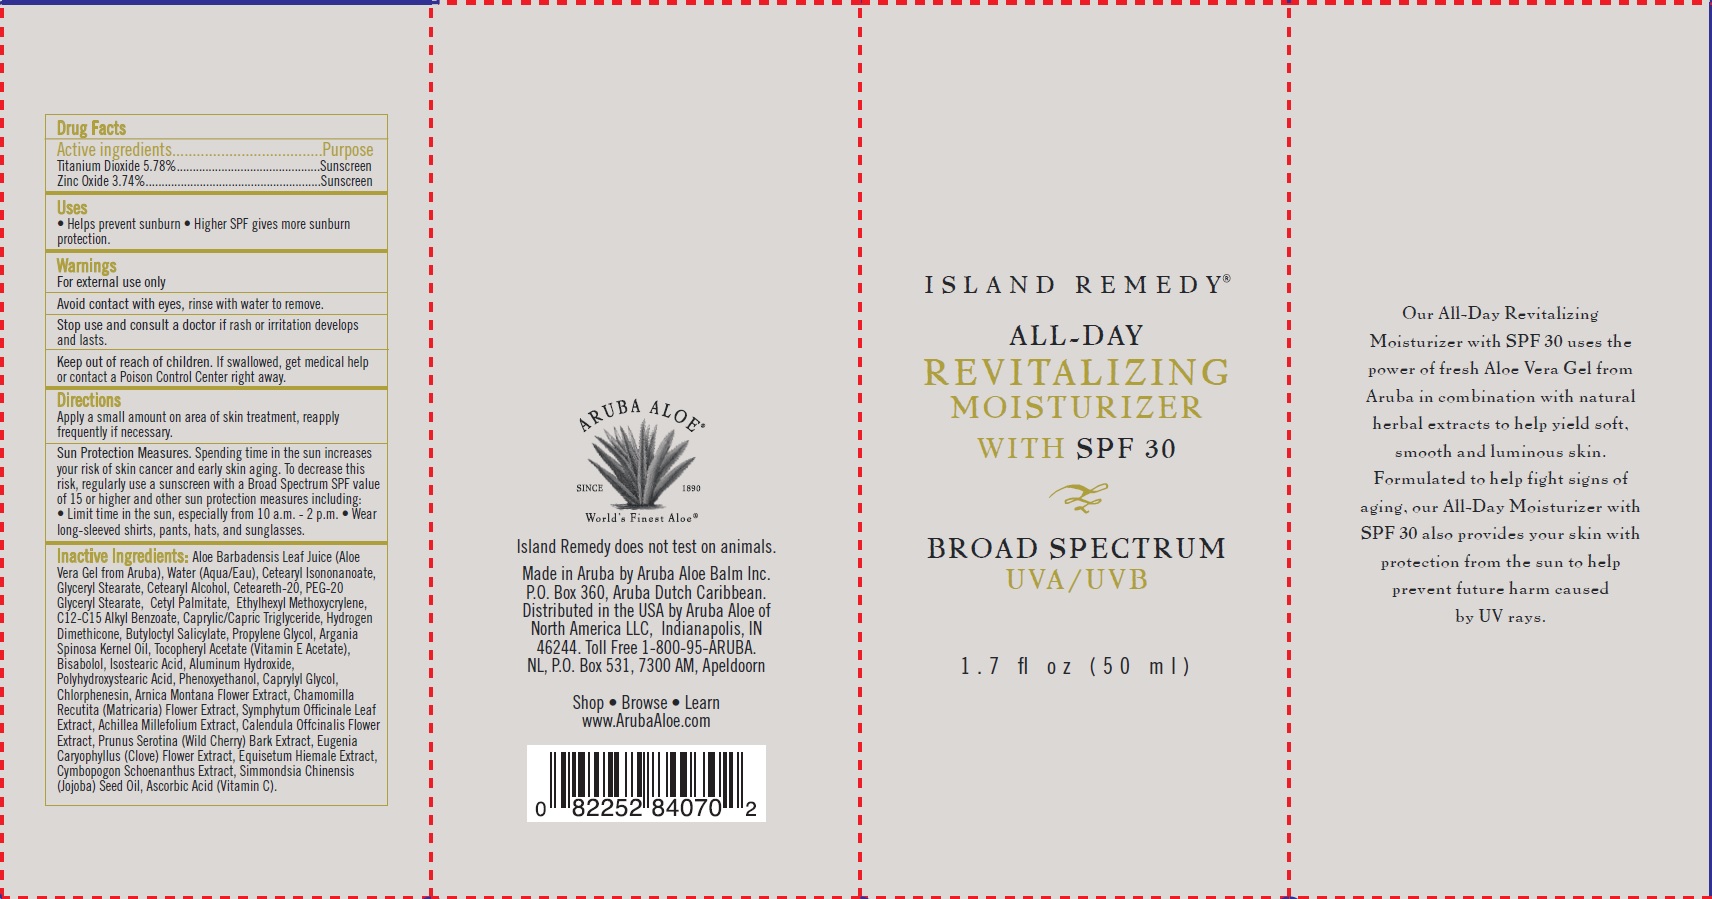 Is Island Remedy All-day Revitalizing Moisturizer With Spf 30 | Titanium Dioxide, Zinc Oxide Cream safe while breastfeeding